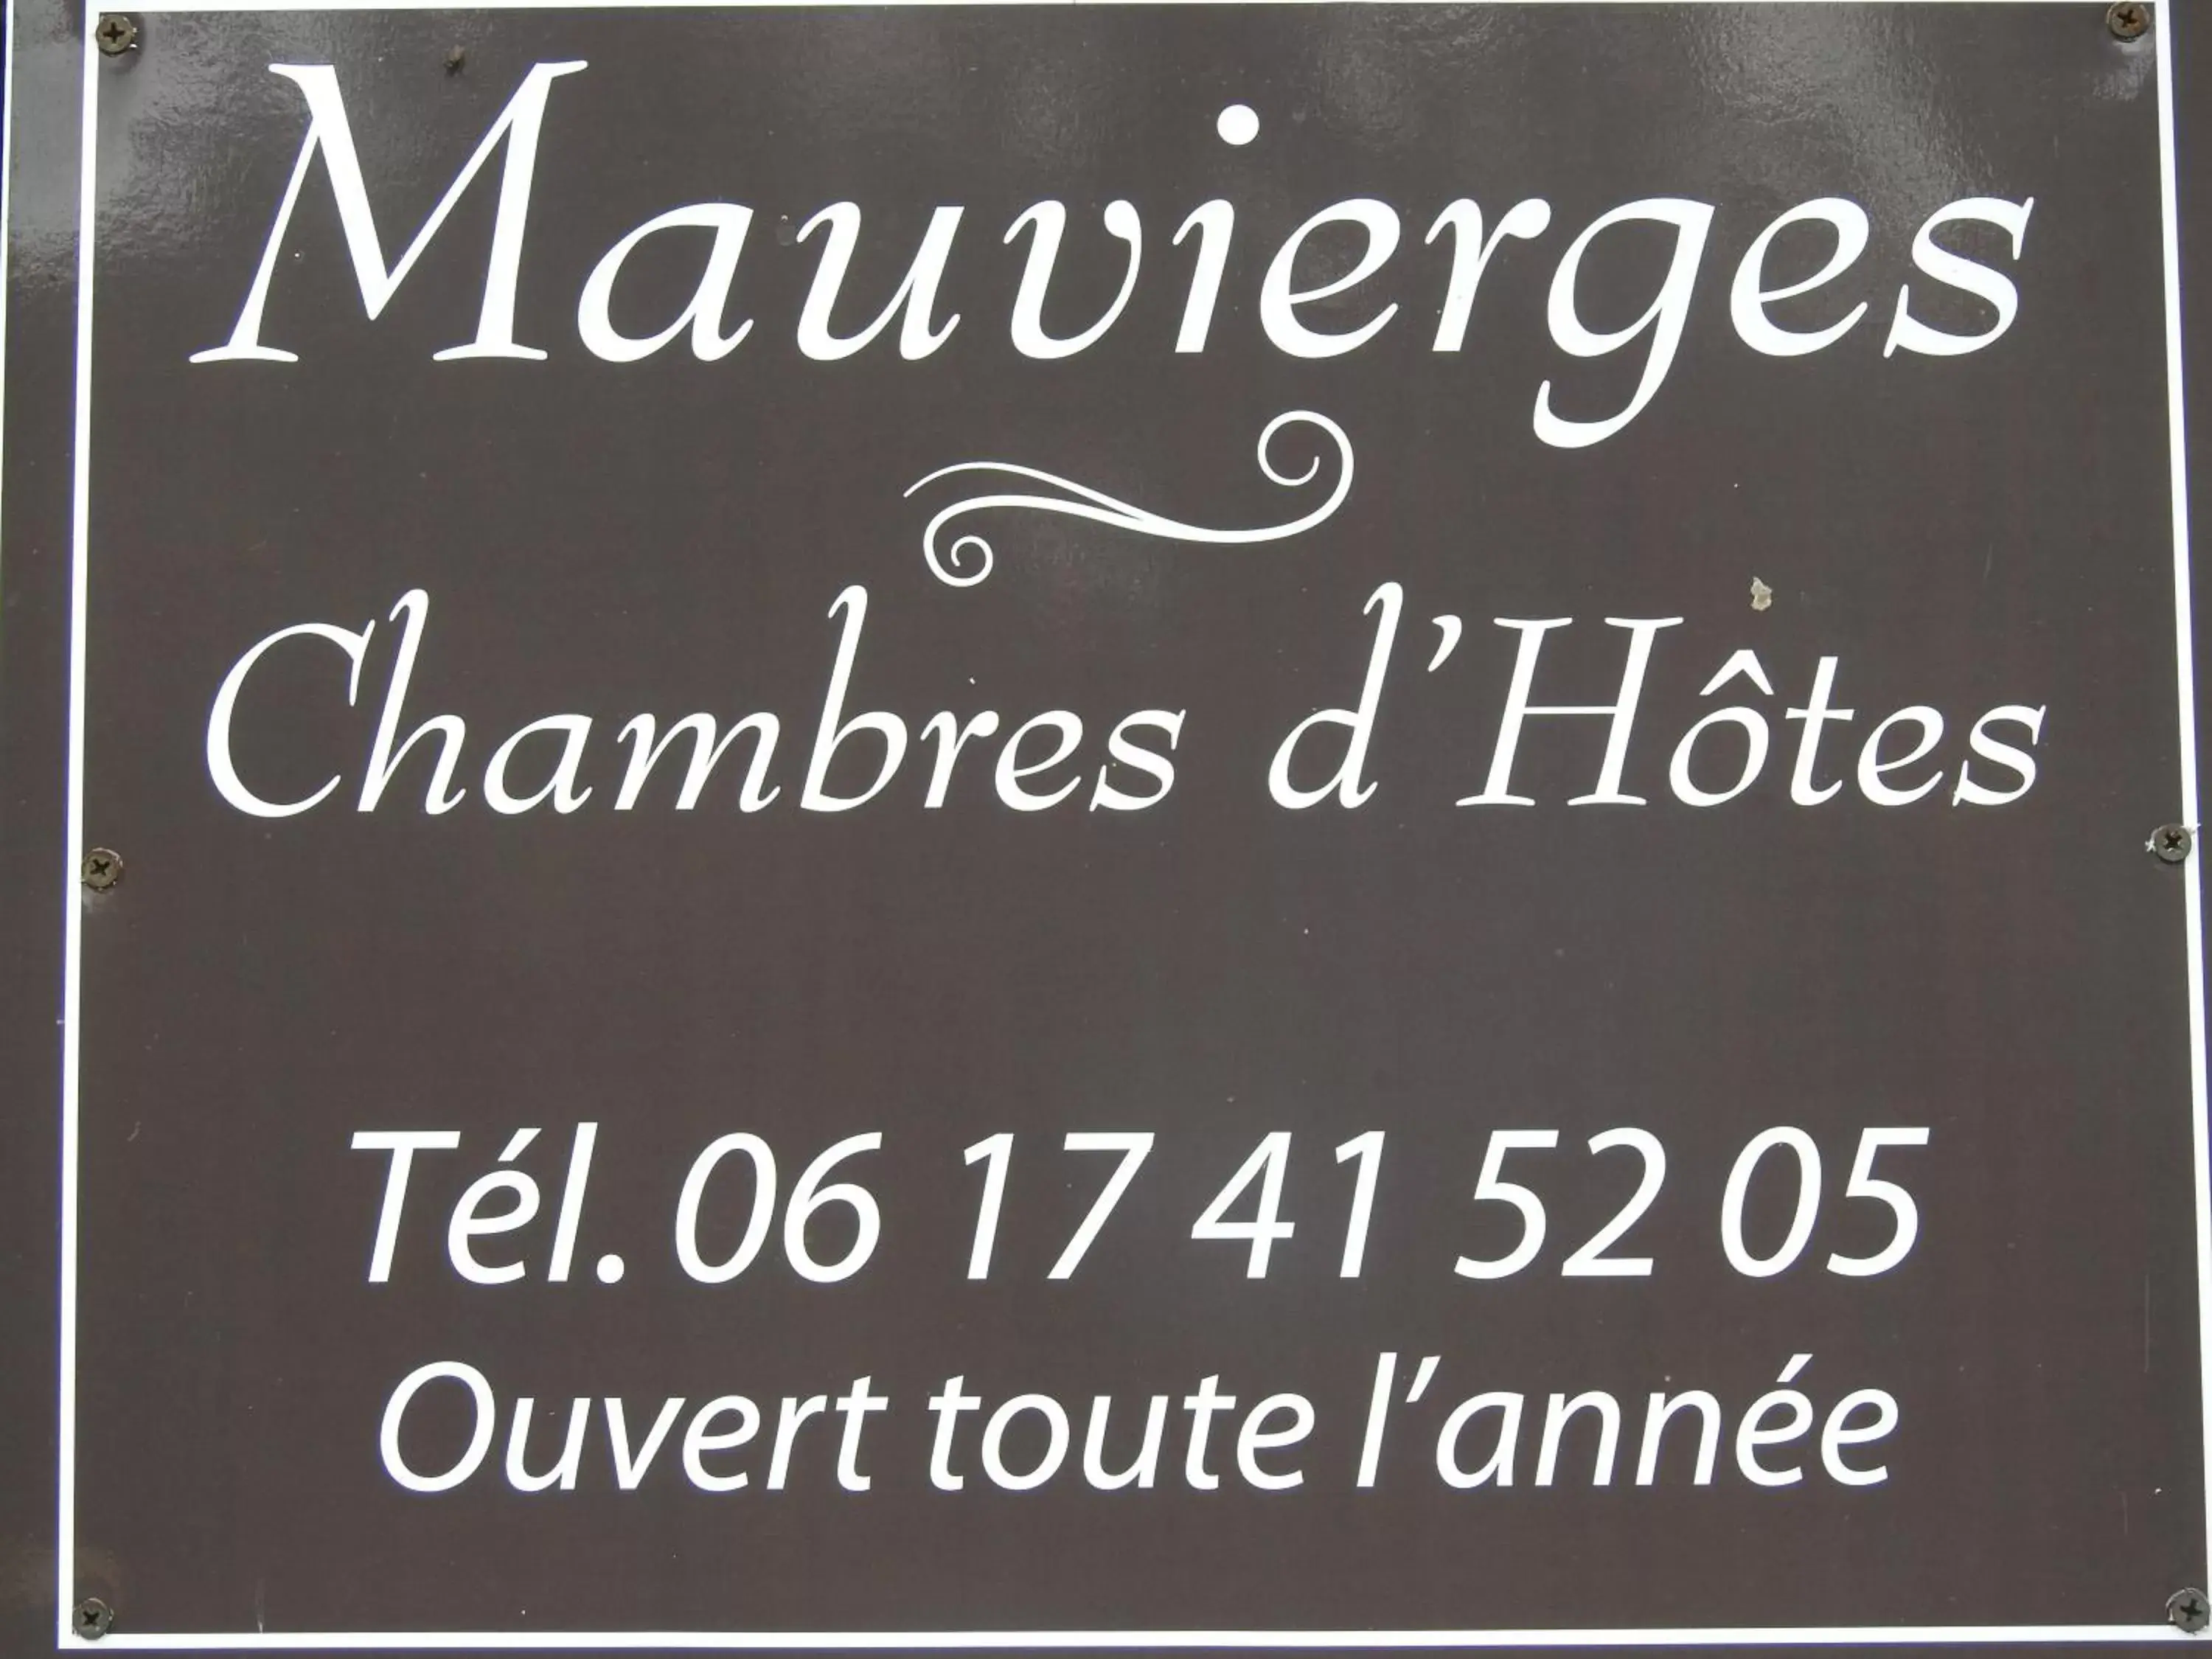 Property logo or sign in Chambres d'hôtes Mauvierges